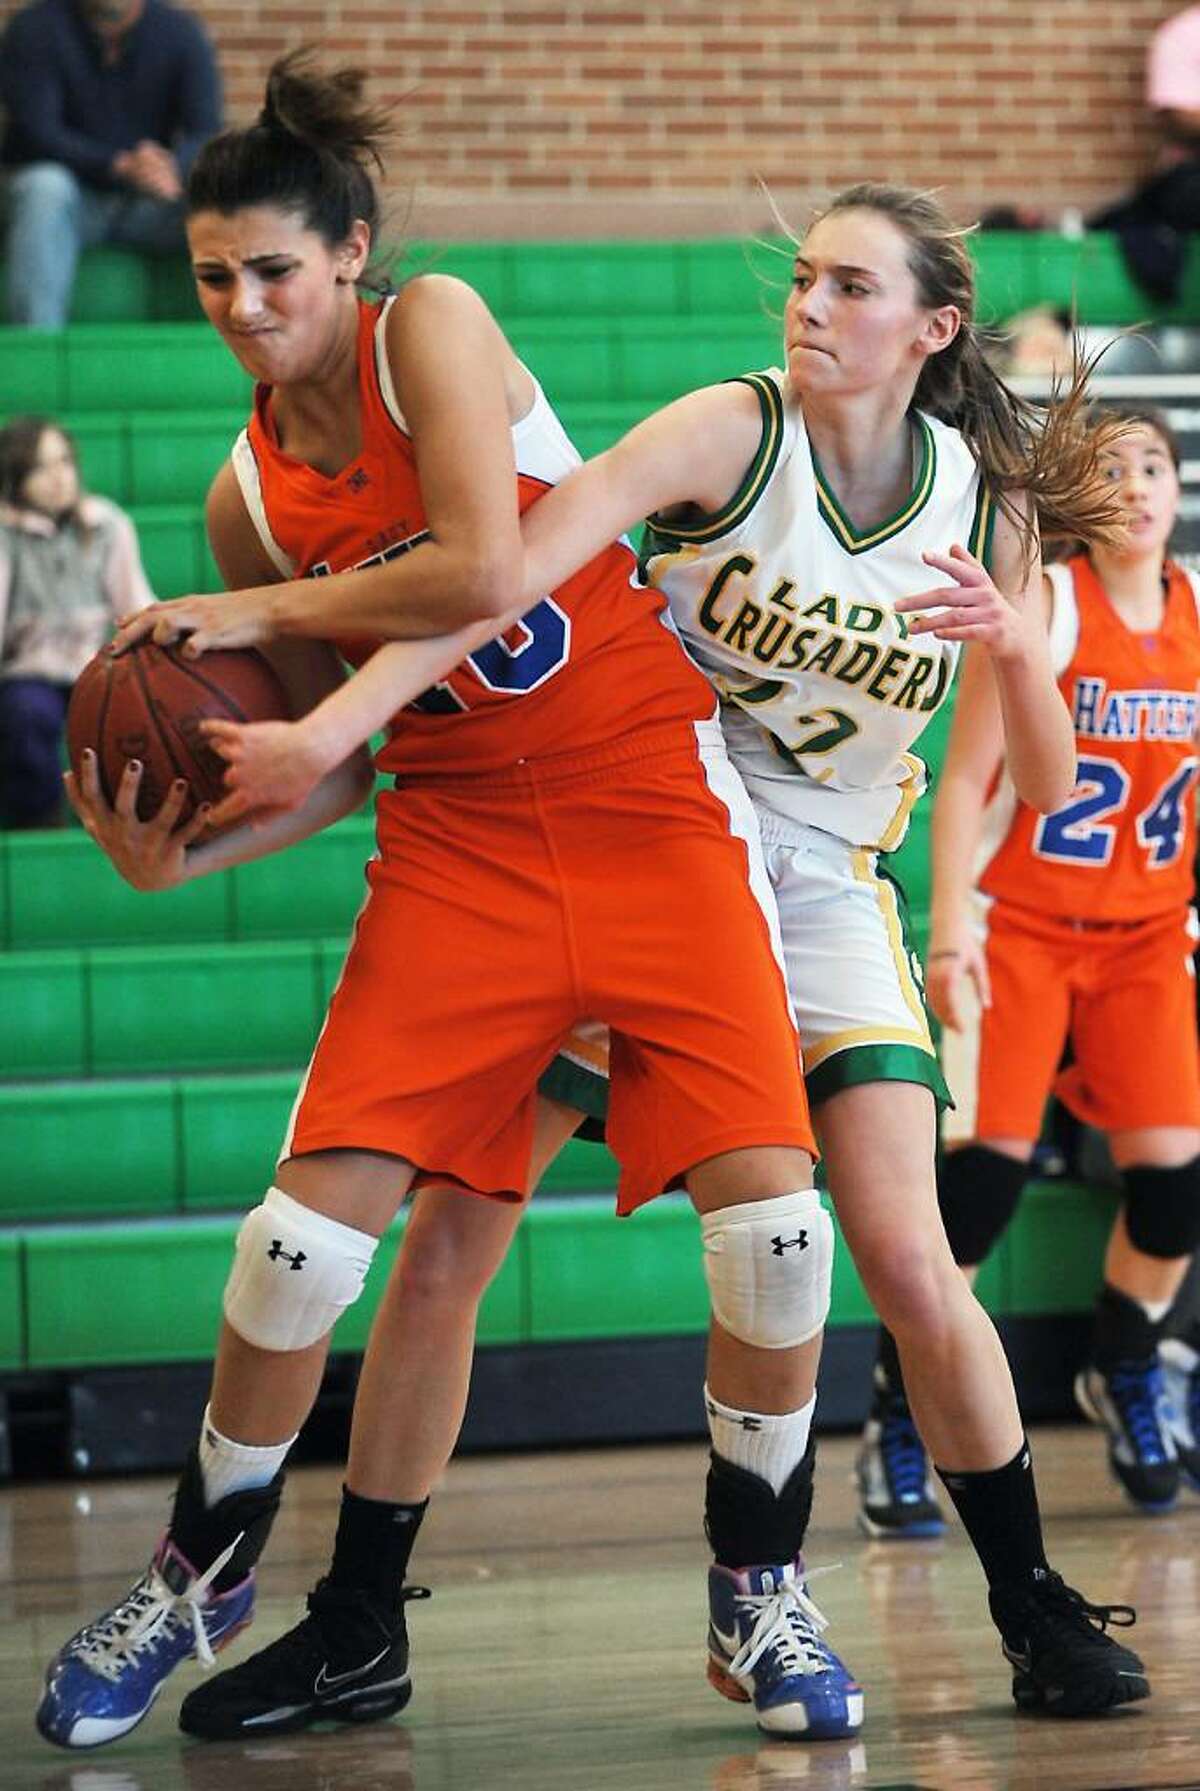 Trinity Catholic's Cayleigh Griffin battles for control of the ball with Danbury's Casey Smith in the quarterfinals of the FCIAC girls basketball championship in Stamford, Conn. on Saturday, Feb. 20, 2010.